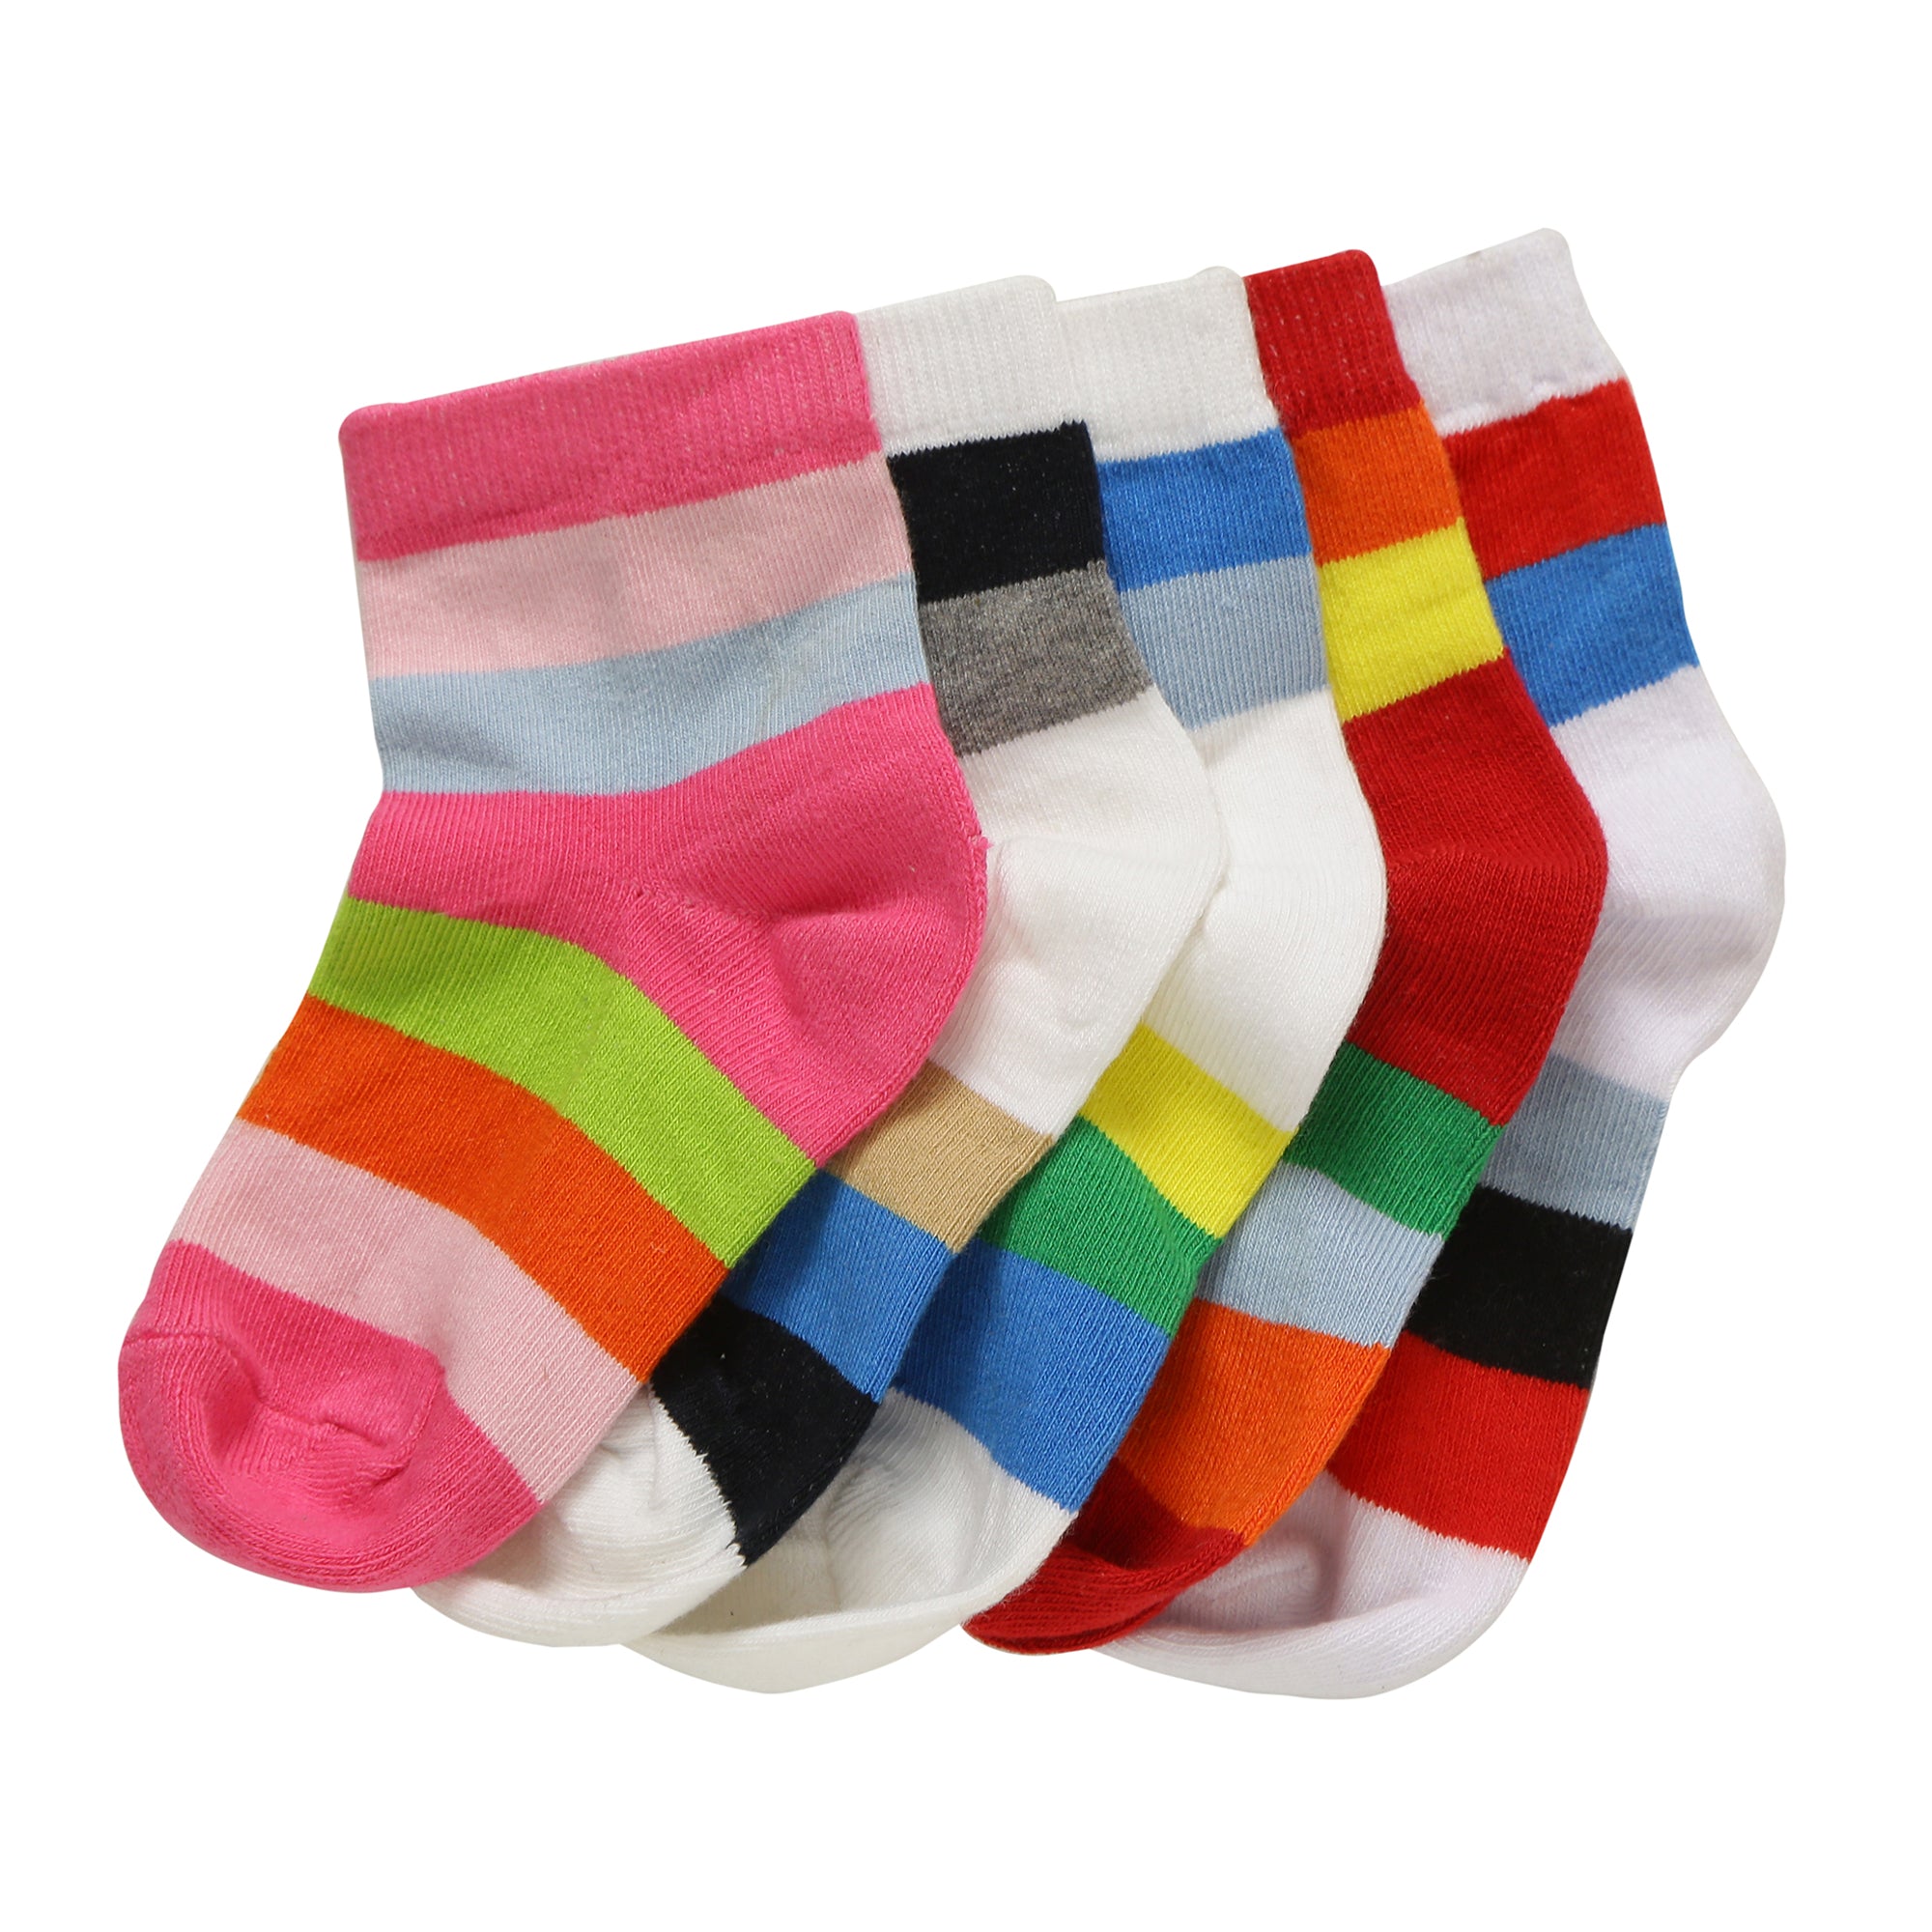 FOOTPRINTS Baby Boy's Organic Cotton Socks (Multicolour, 12 -24 Months) -Pack of 5 Pairs